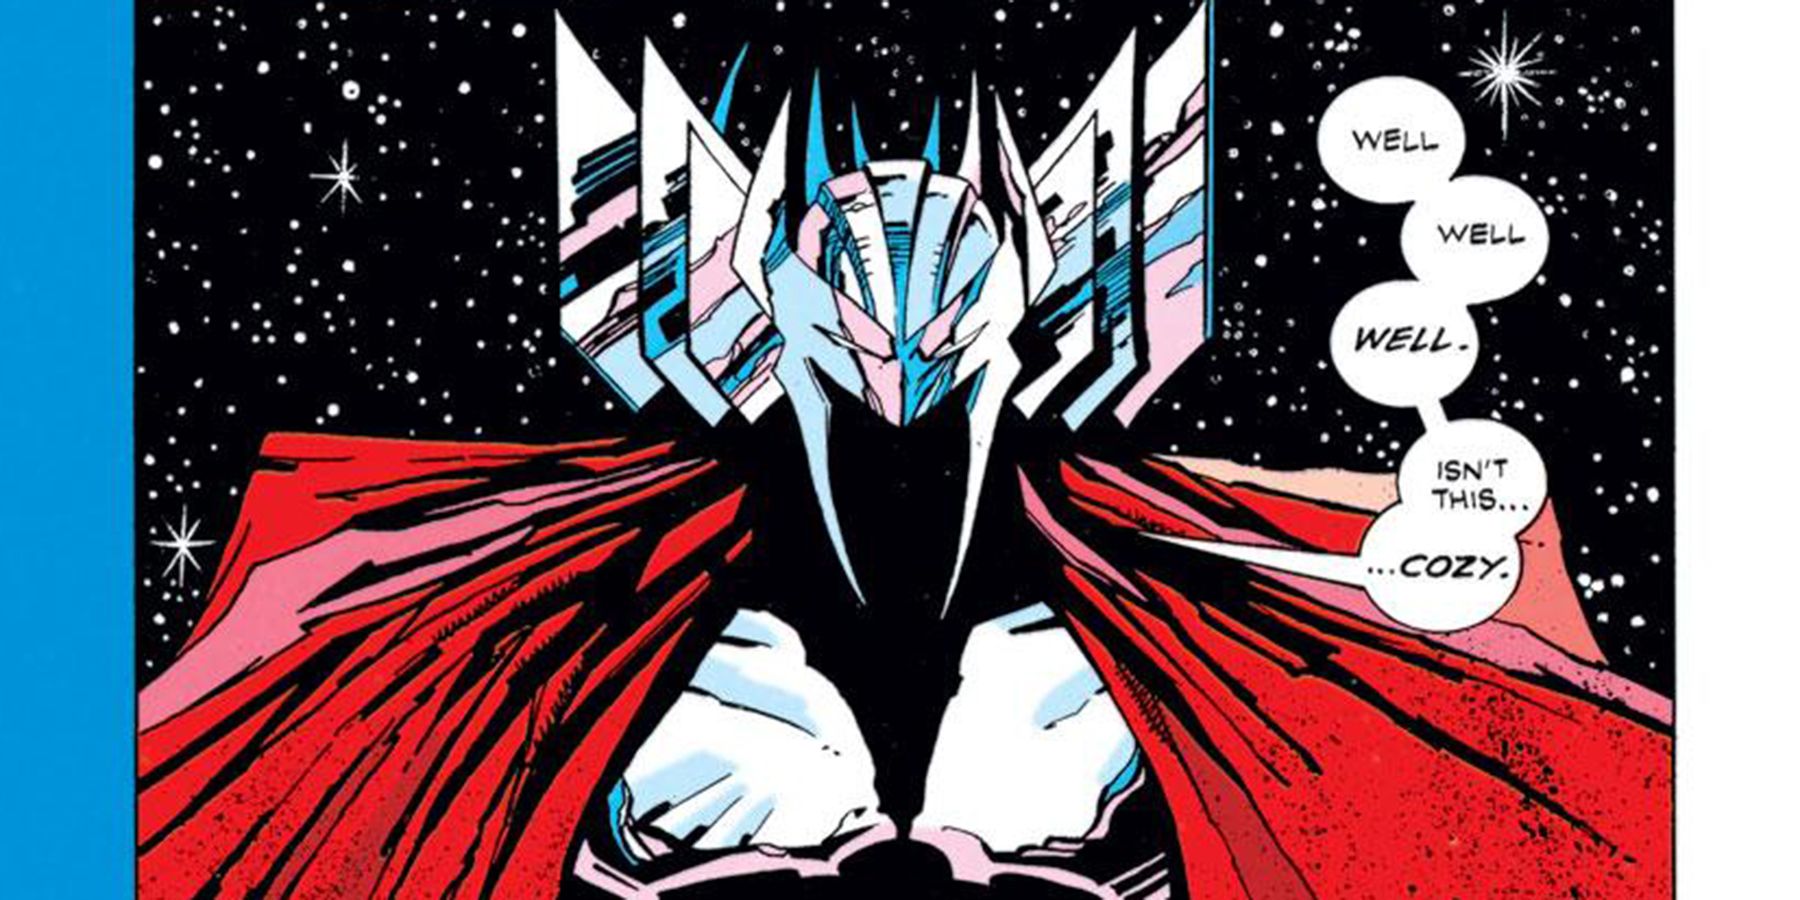 Stryfe makes an ominous entrance.